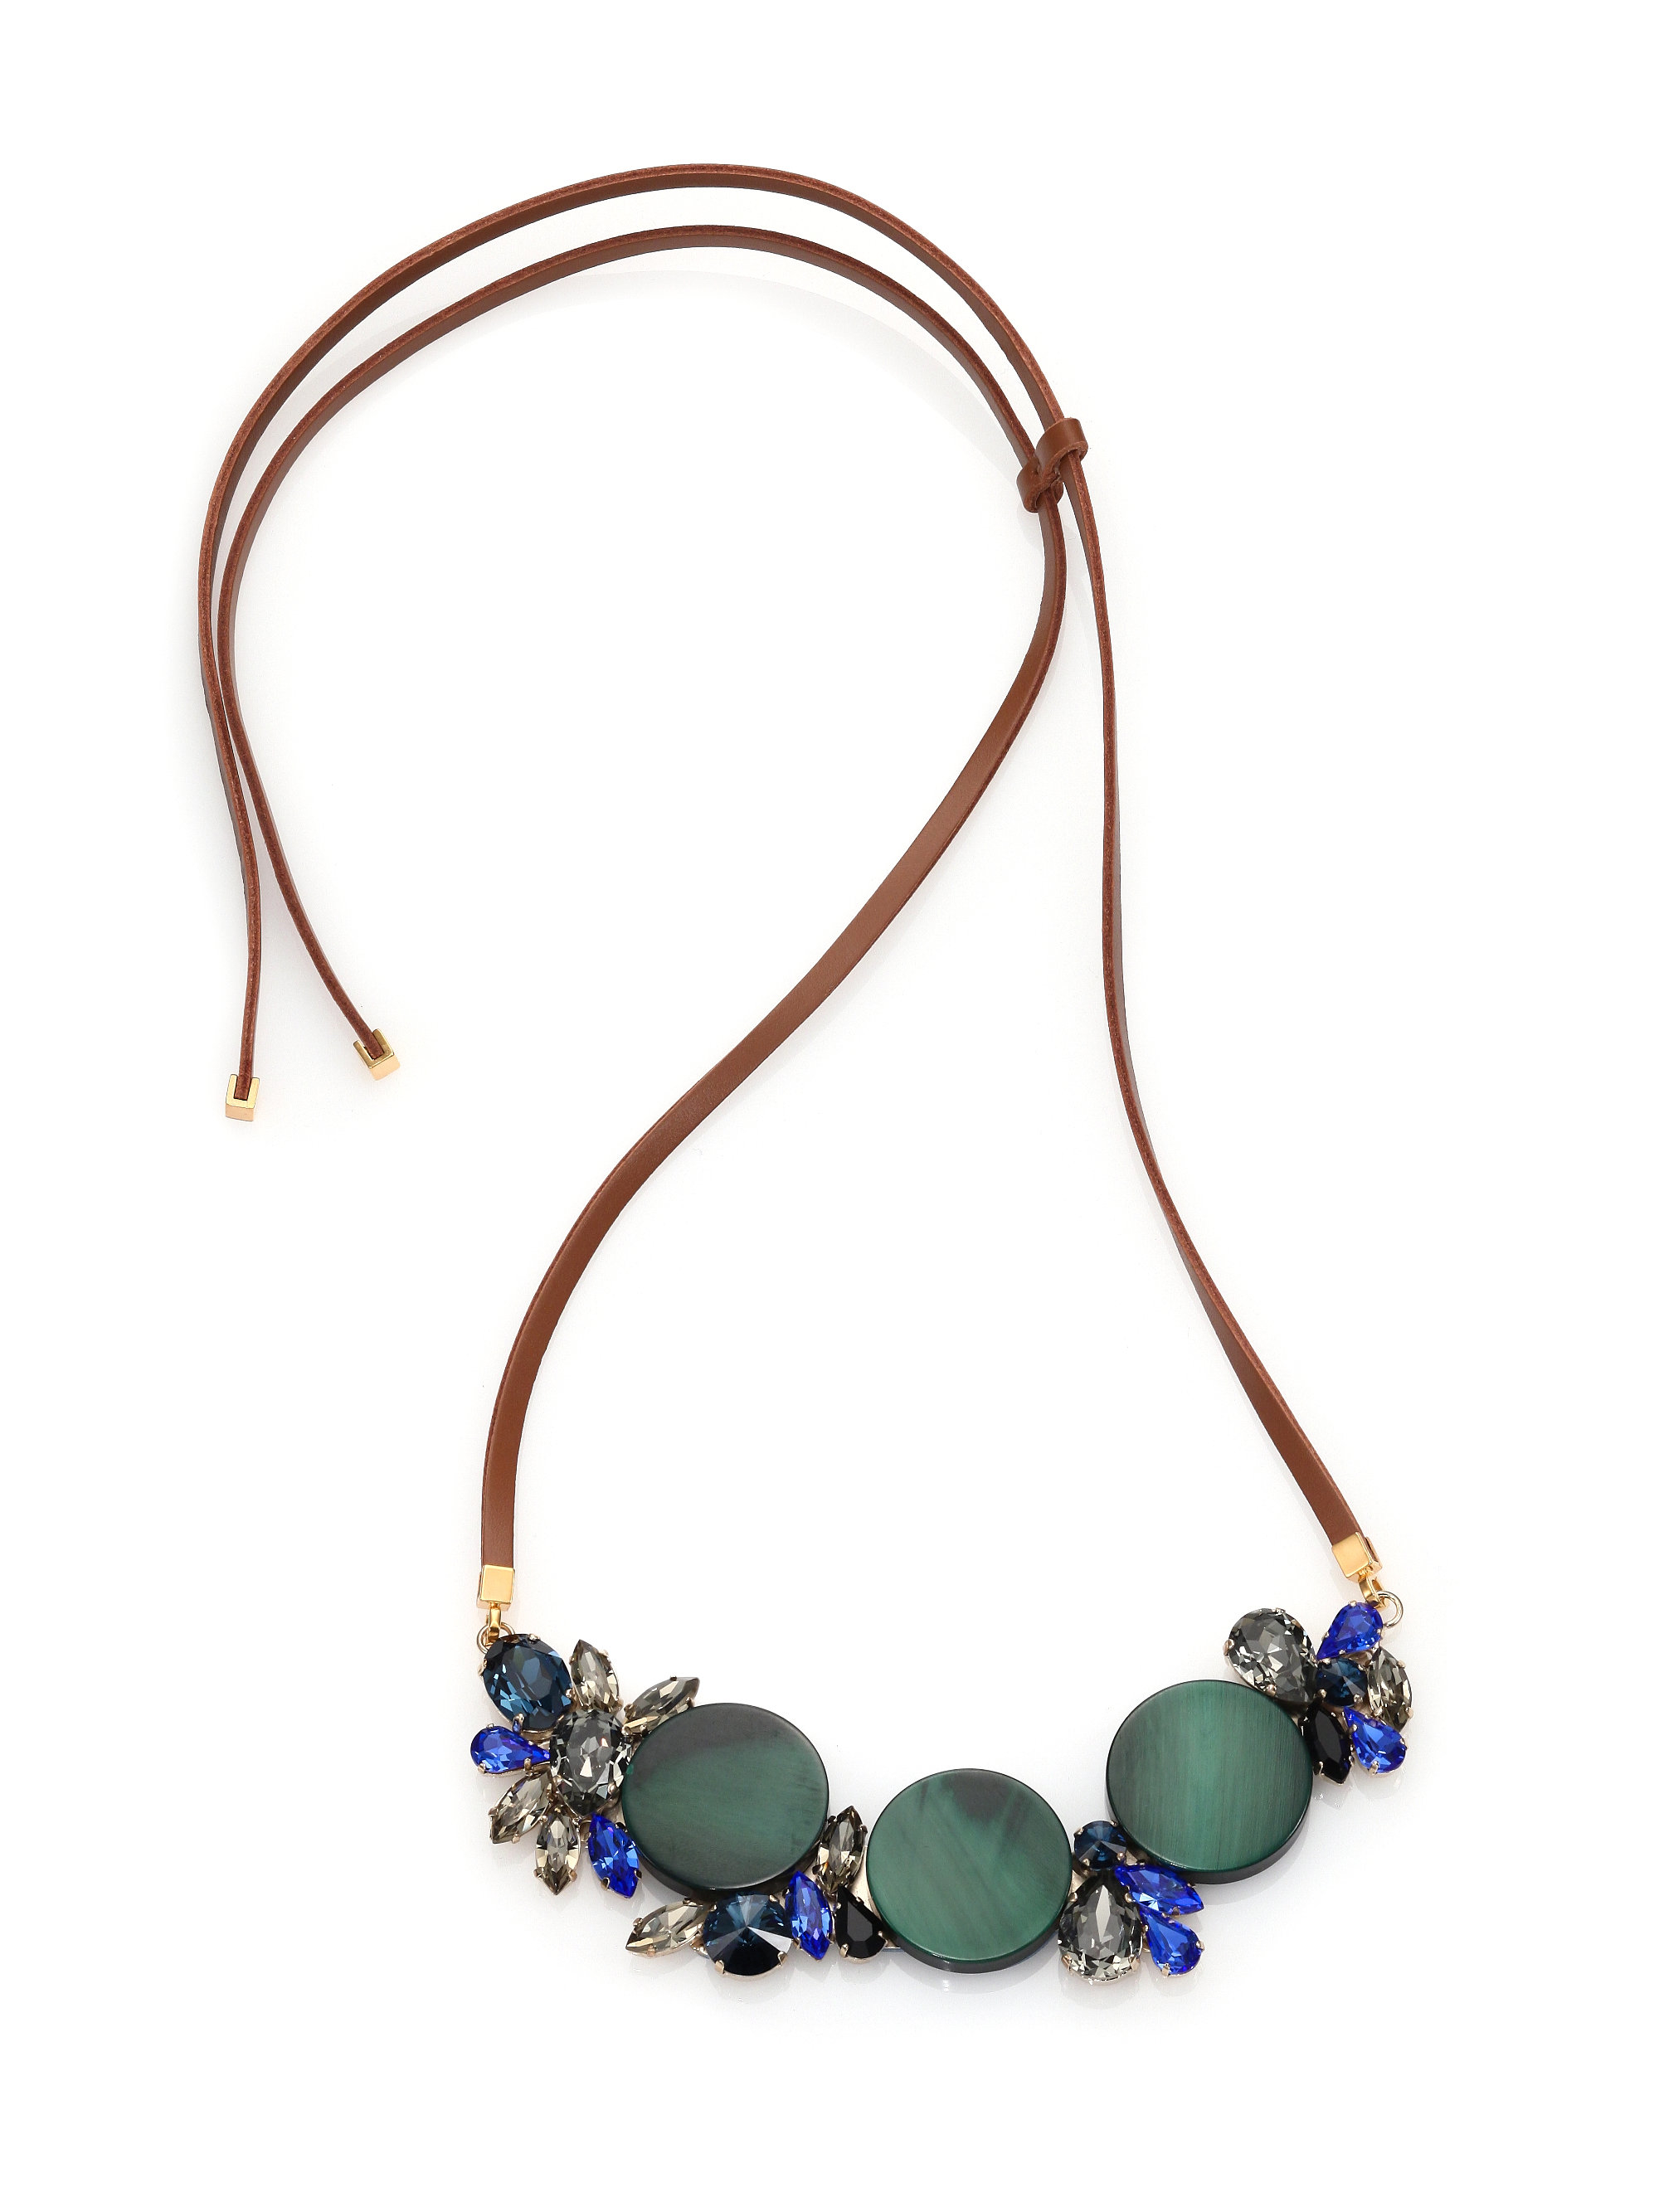 Lyst - Marni Horn, Crystal & Leather Pendant Necklace in Green